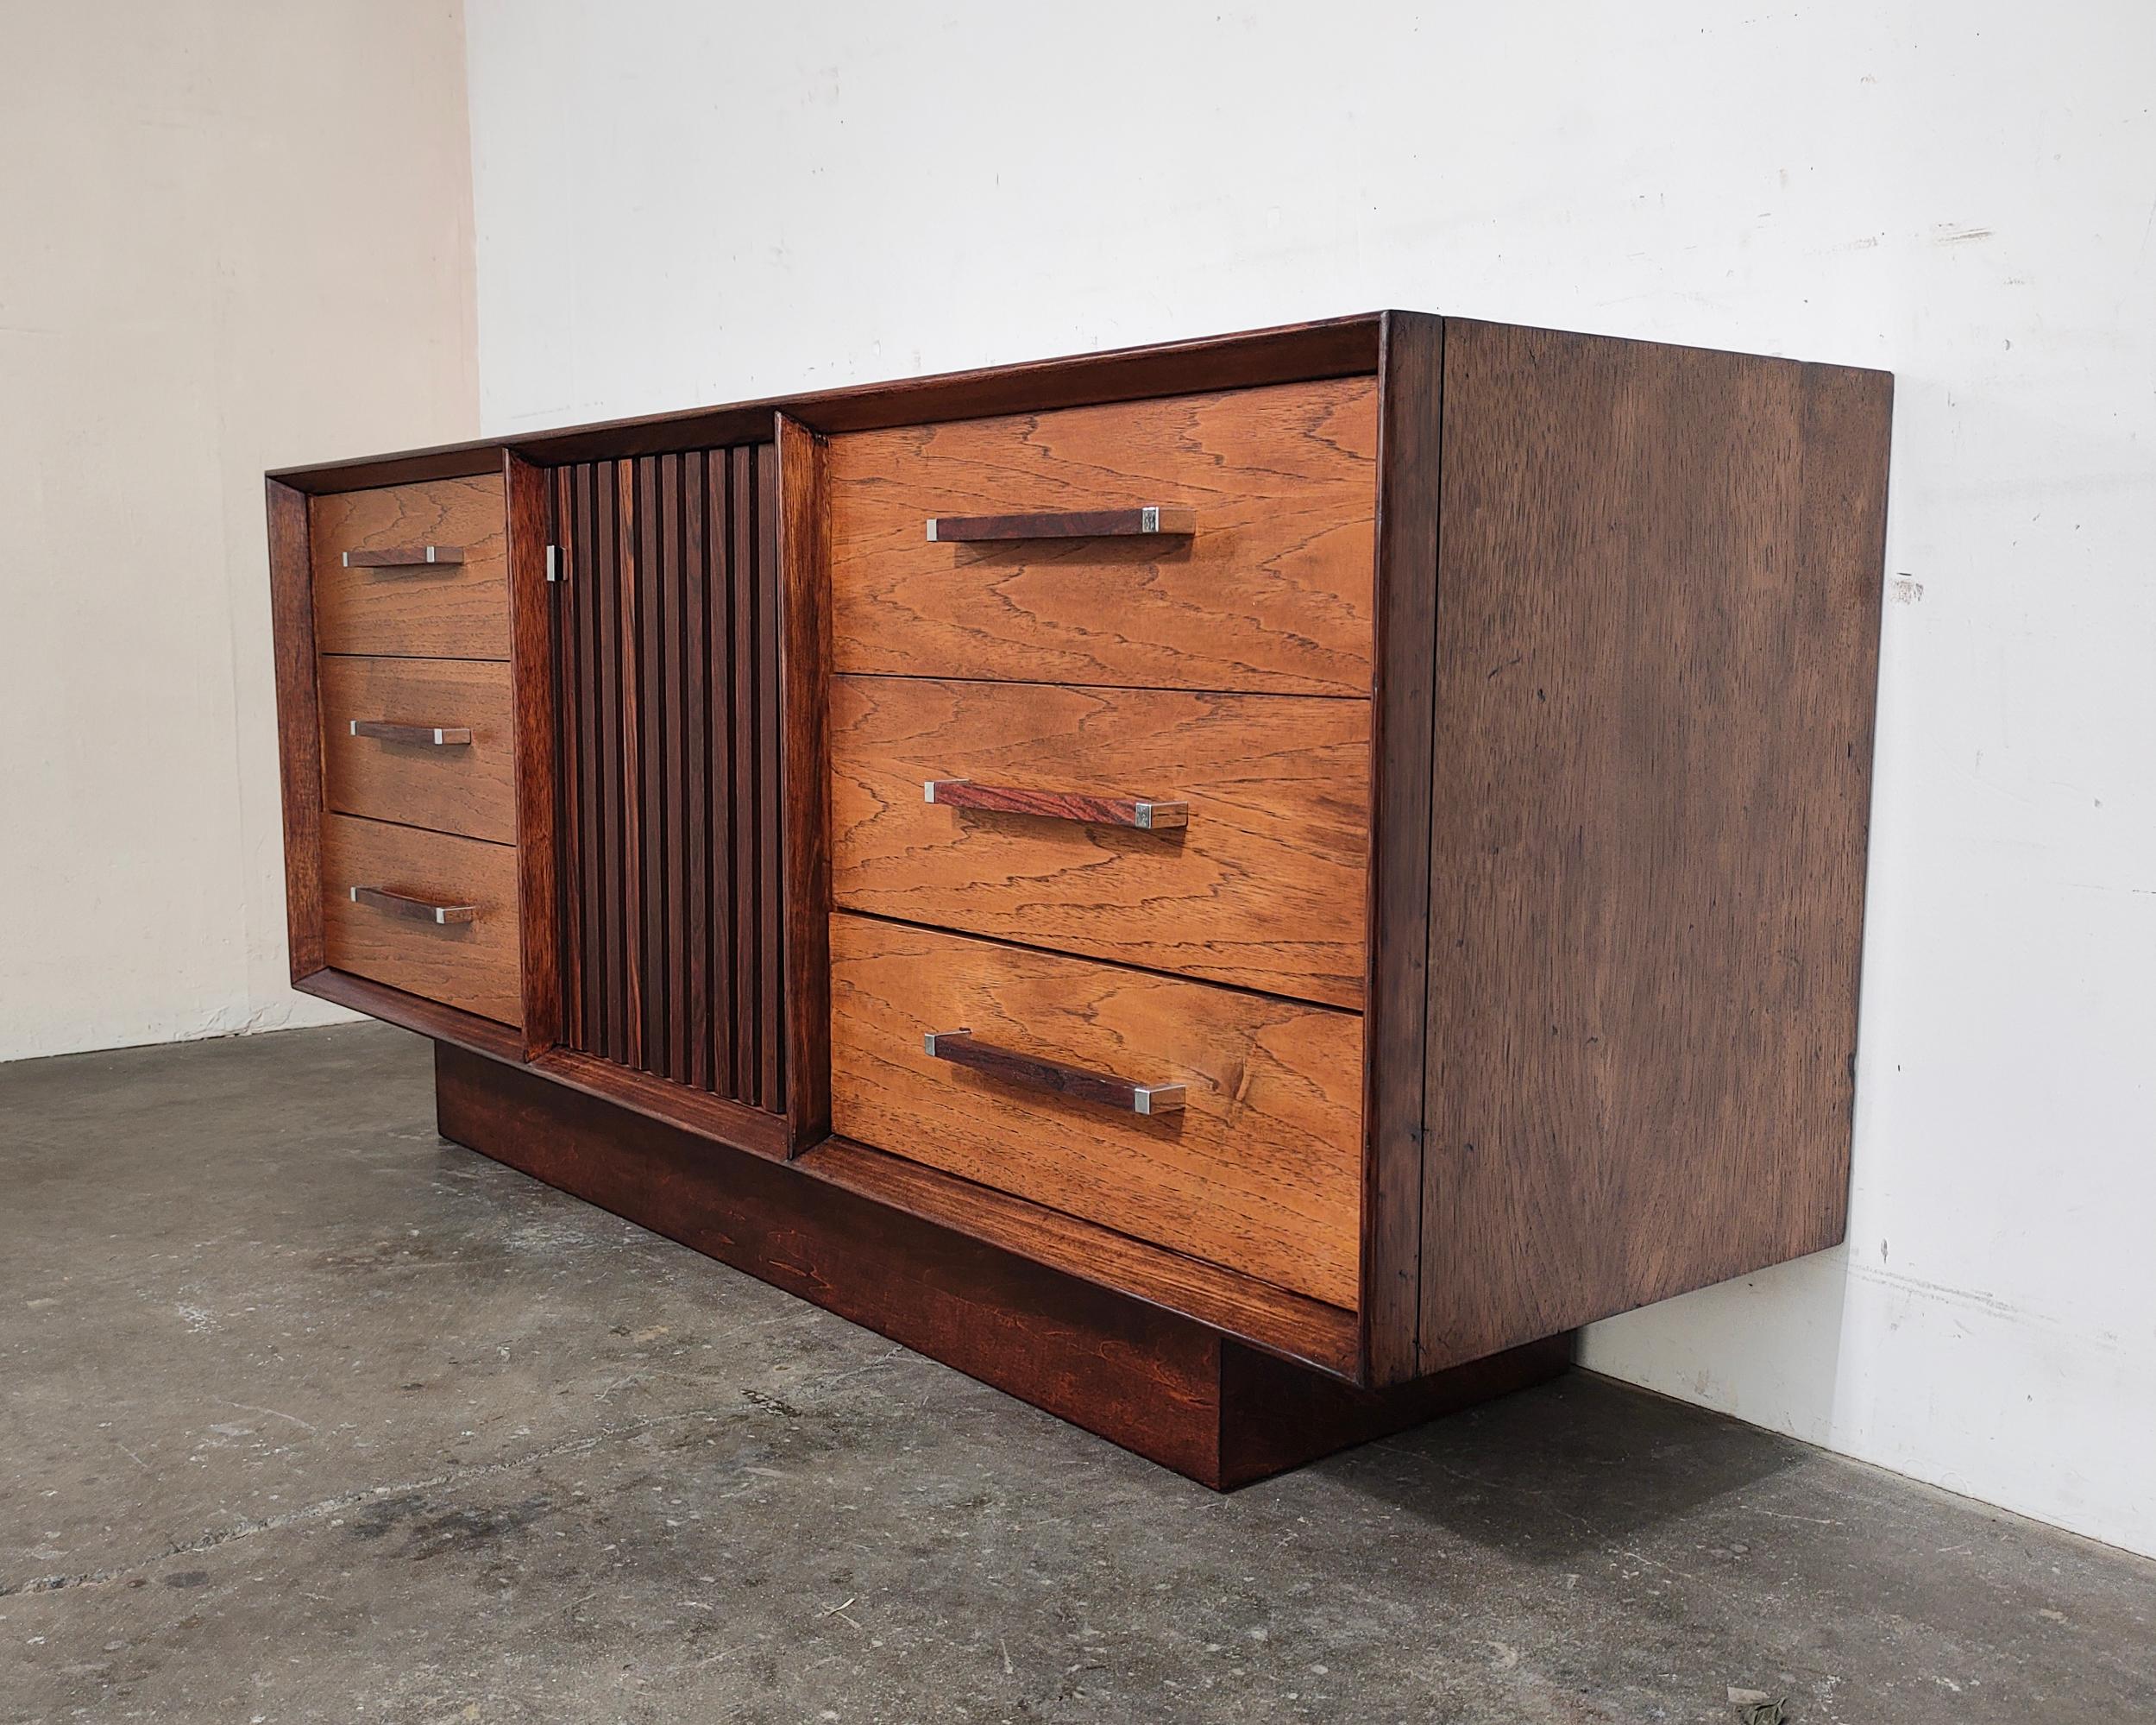 Mid-Century Modern rosewood and pecan wood lowboy 'Tower Suite' dresser by Lane. Six drawers on each side with contrasting rosewood and chrome pulls. Rosewood slat center door contains three smaller drawers inside. Top features rosewood design